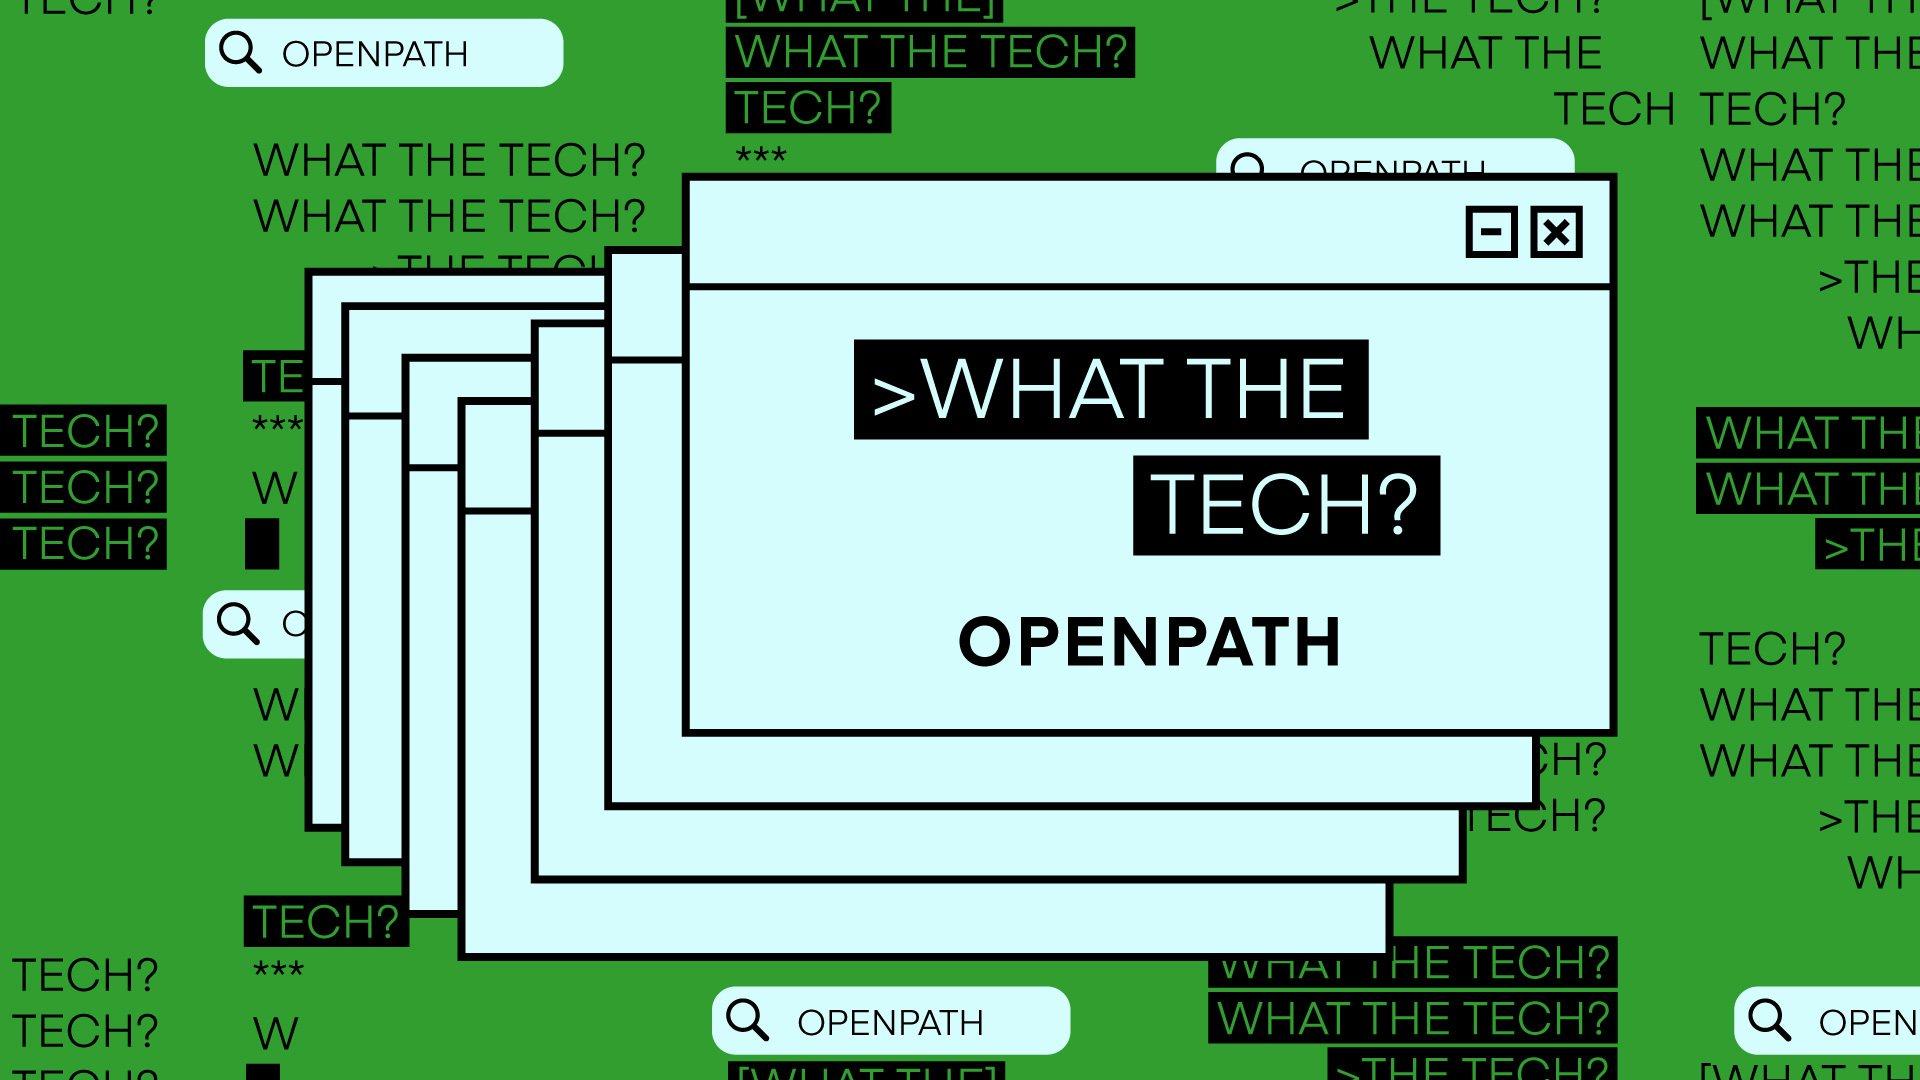 What the Tech is OpenPath?